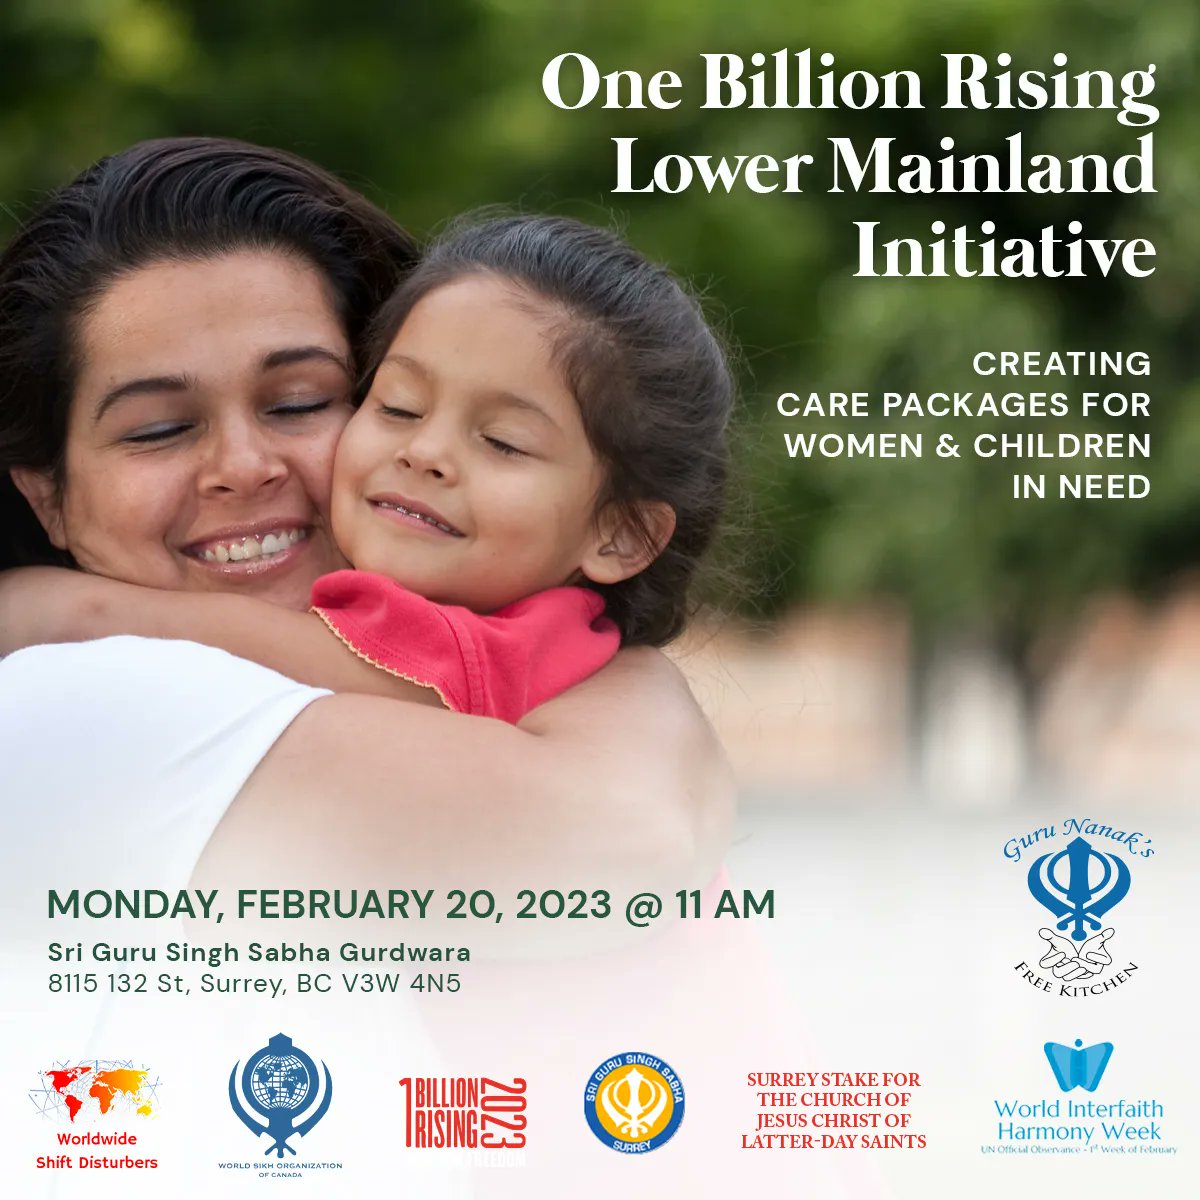 Join us for 1 Billion Rising, a global campaign to end violence against women. We will be creating care packages for women and children in shelters.

#1BillionRising #WorldInterfaithHarmonyWeek #worldwide #worldwideshift #surrey  #gnfk #thechurchofjesuschristoflatterdaysaints